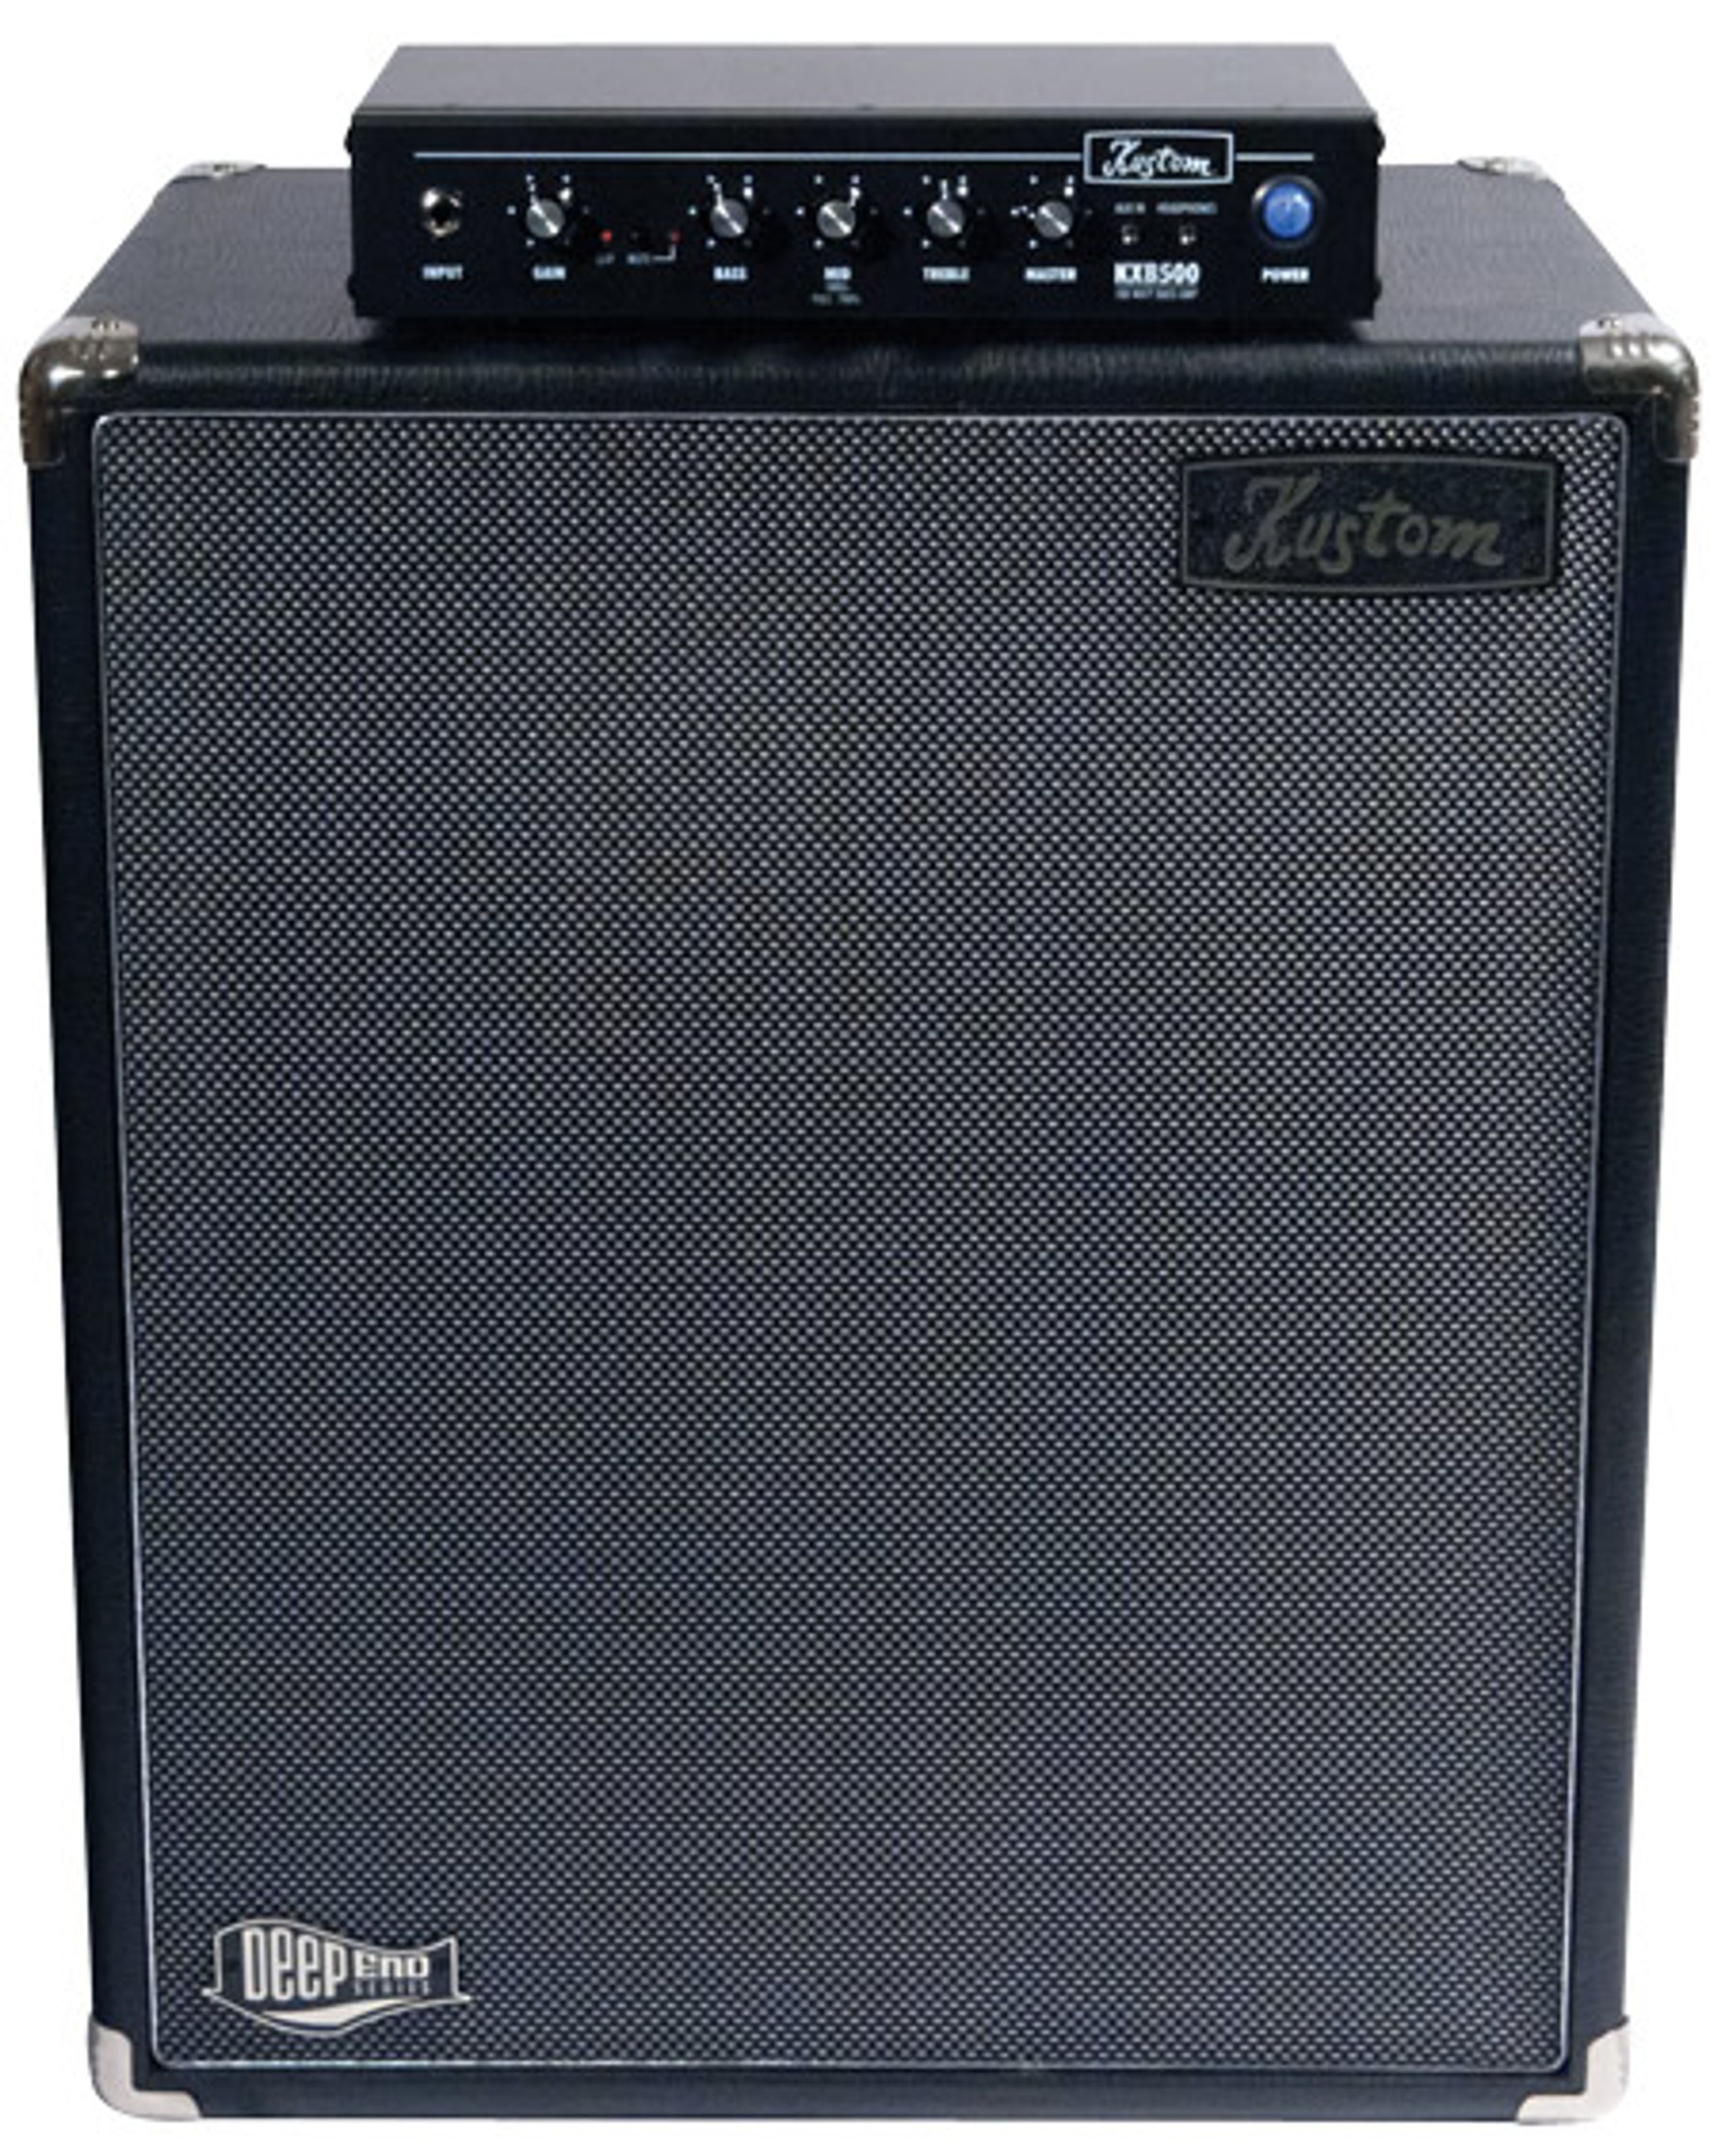 Kustom Amplification KXB500 Bass Amp and DE115NEO Bass Cab Review